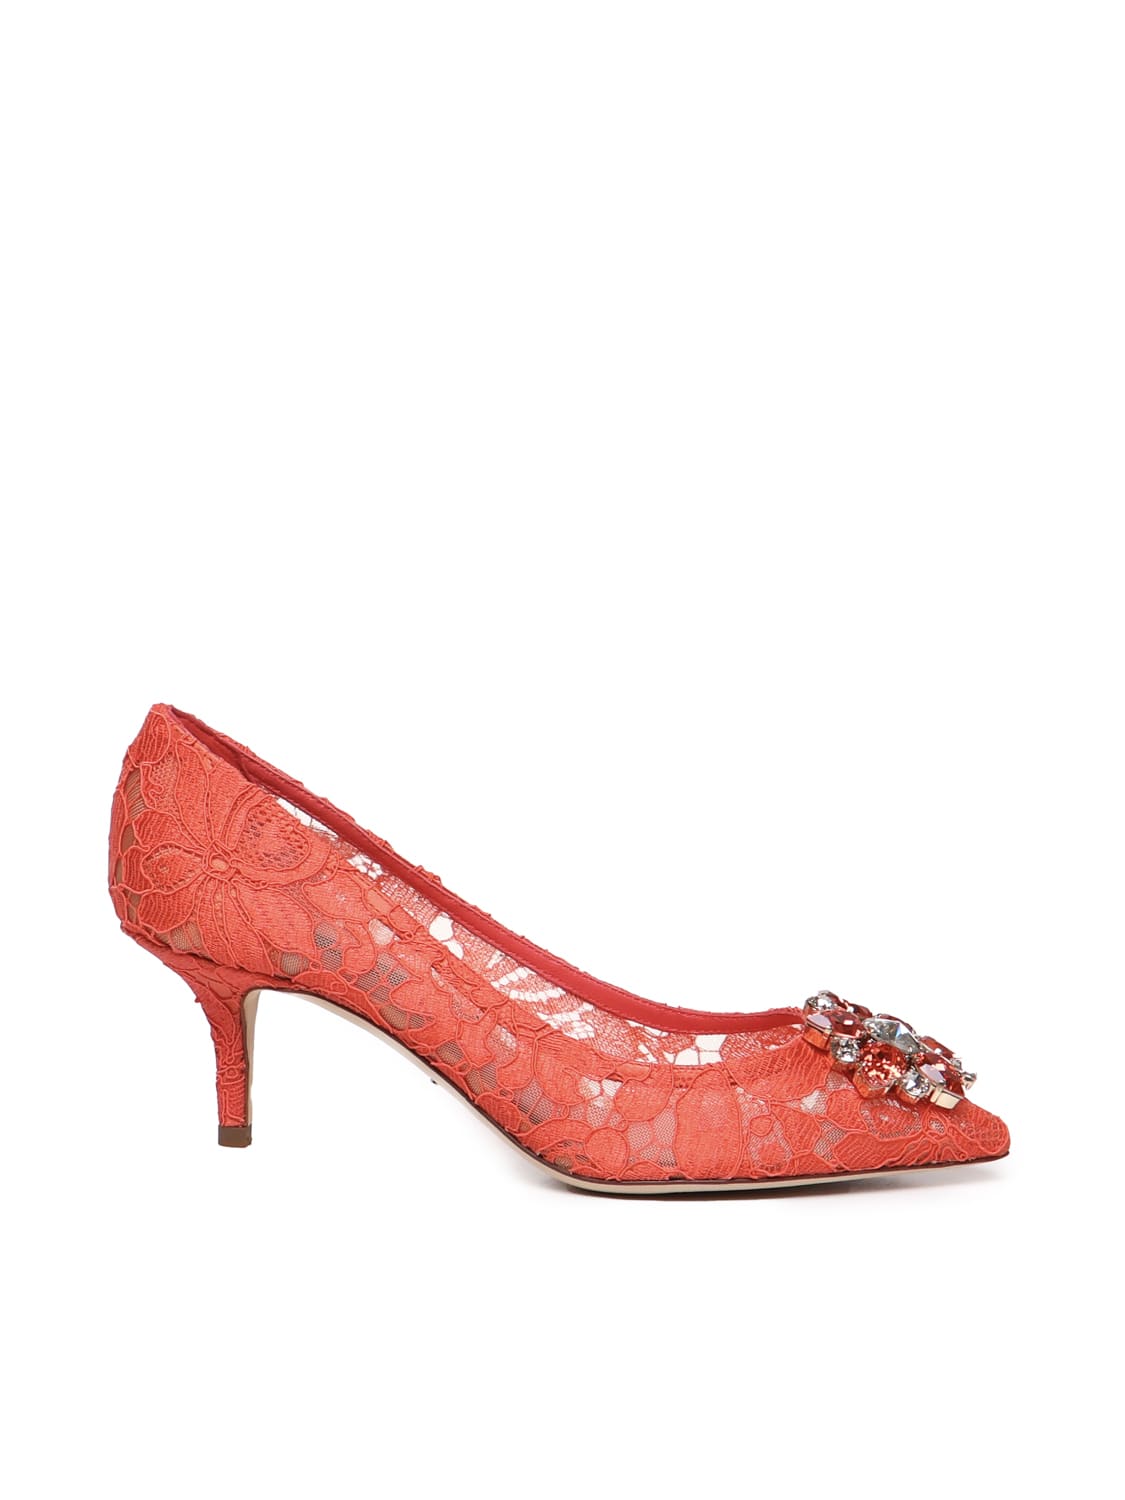 Taormina Lace Pumps With Crystals